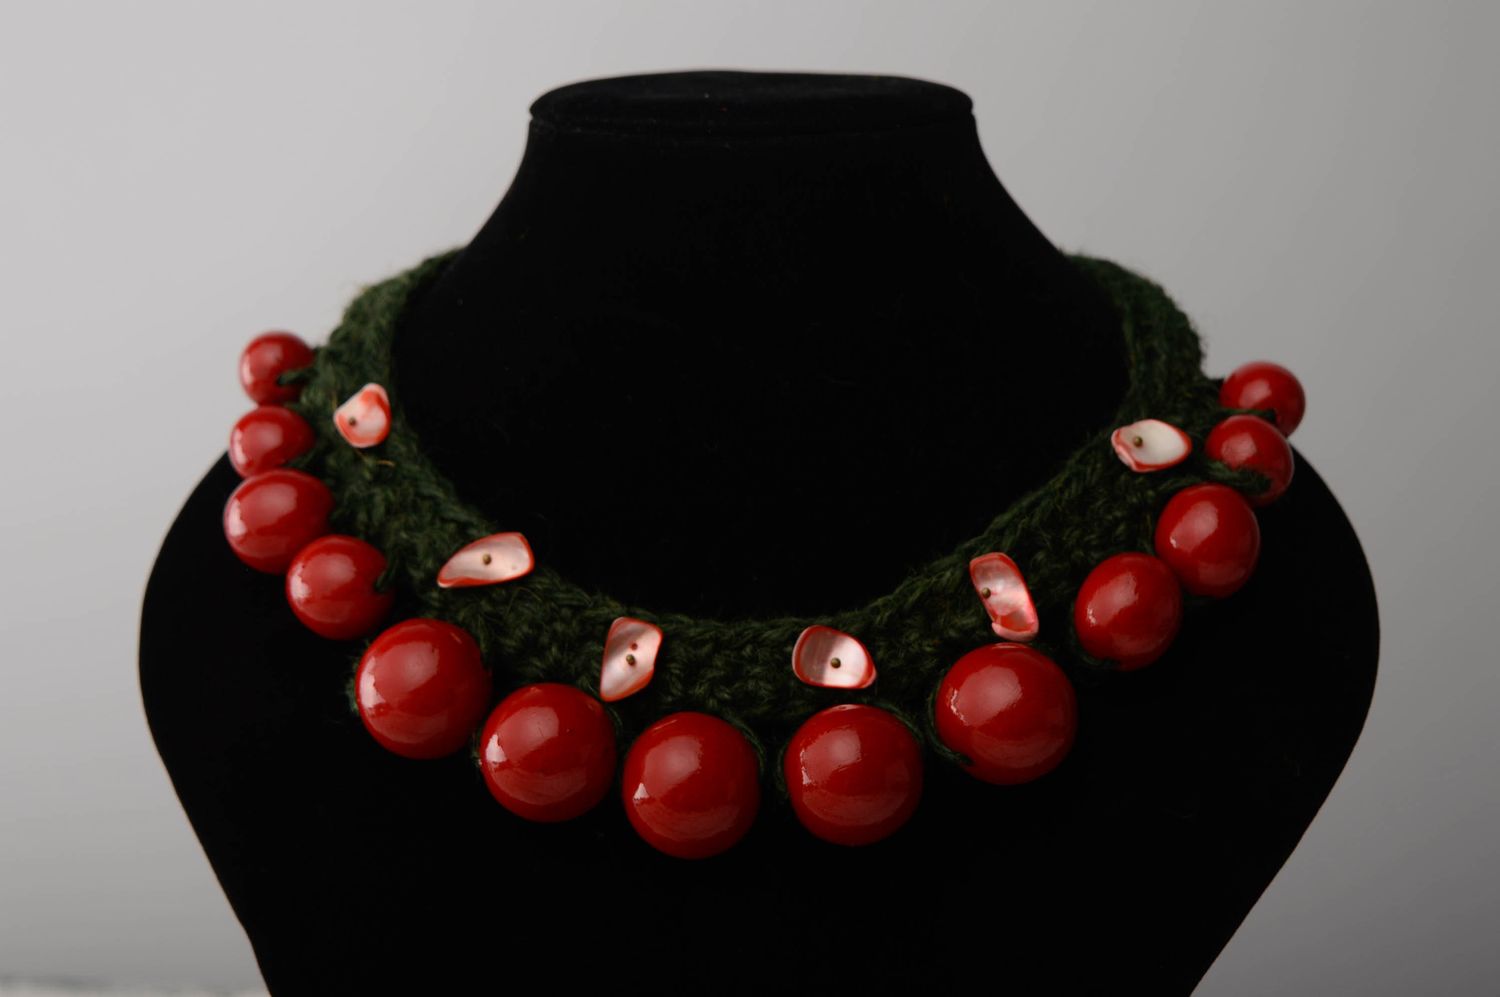 Crochet necklace in eco style photo 2